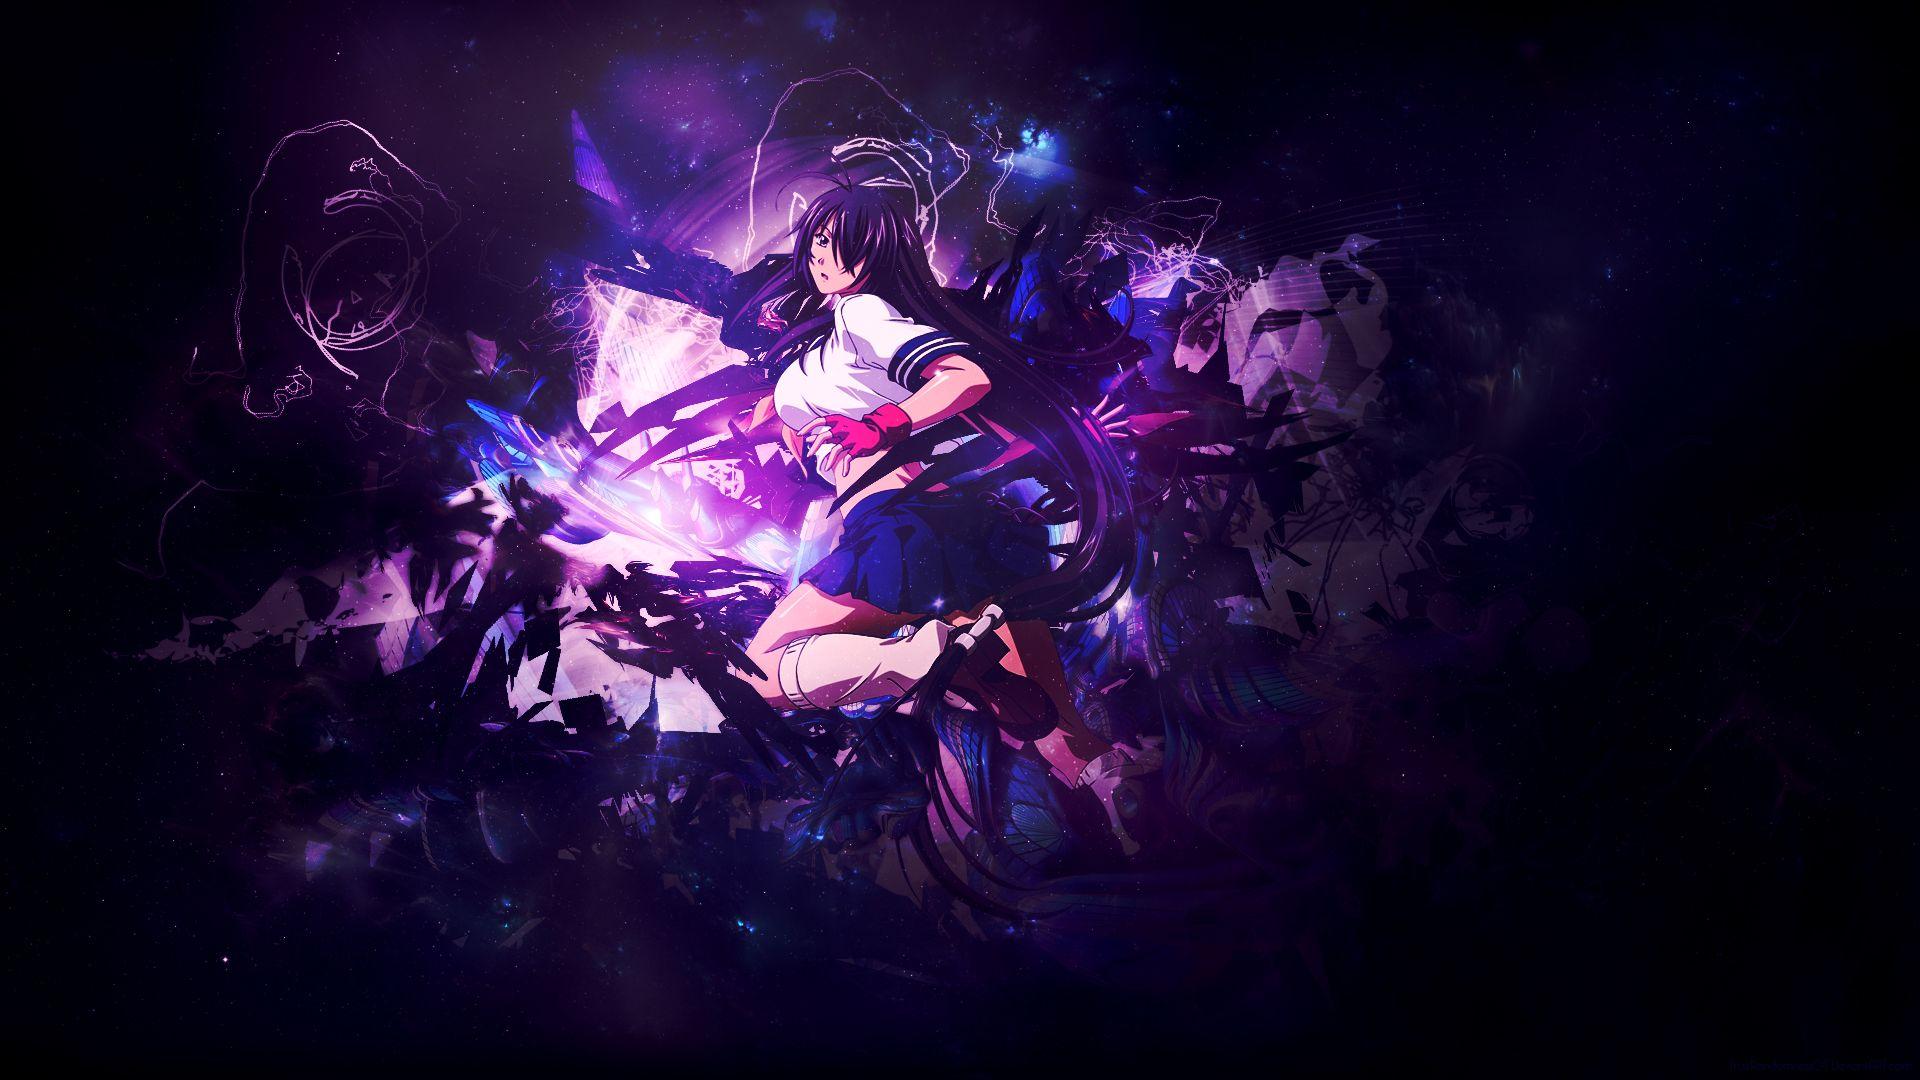 Purple Anime Wallpapers 1080p - Wallpaper Cave